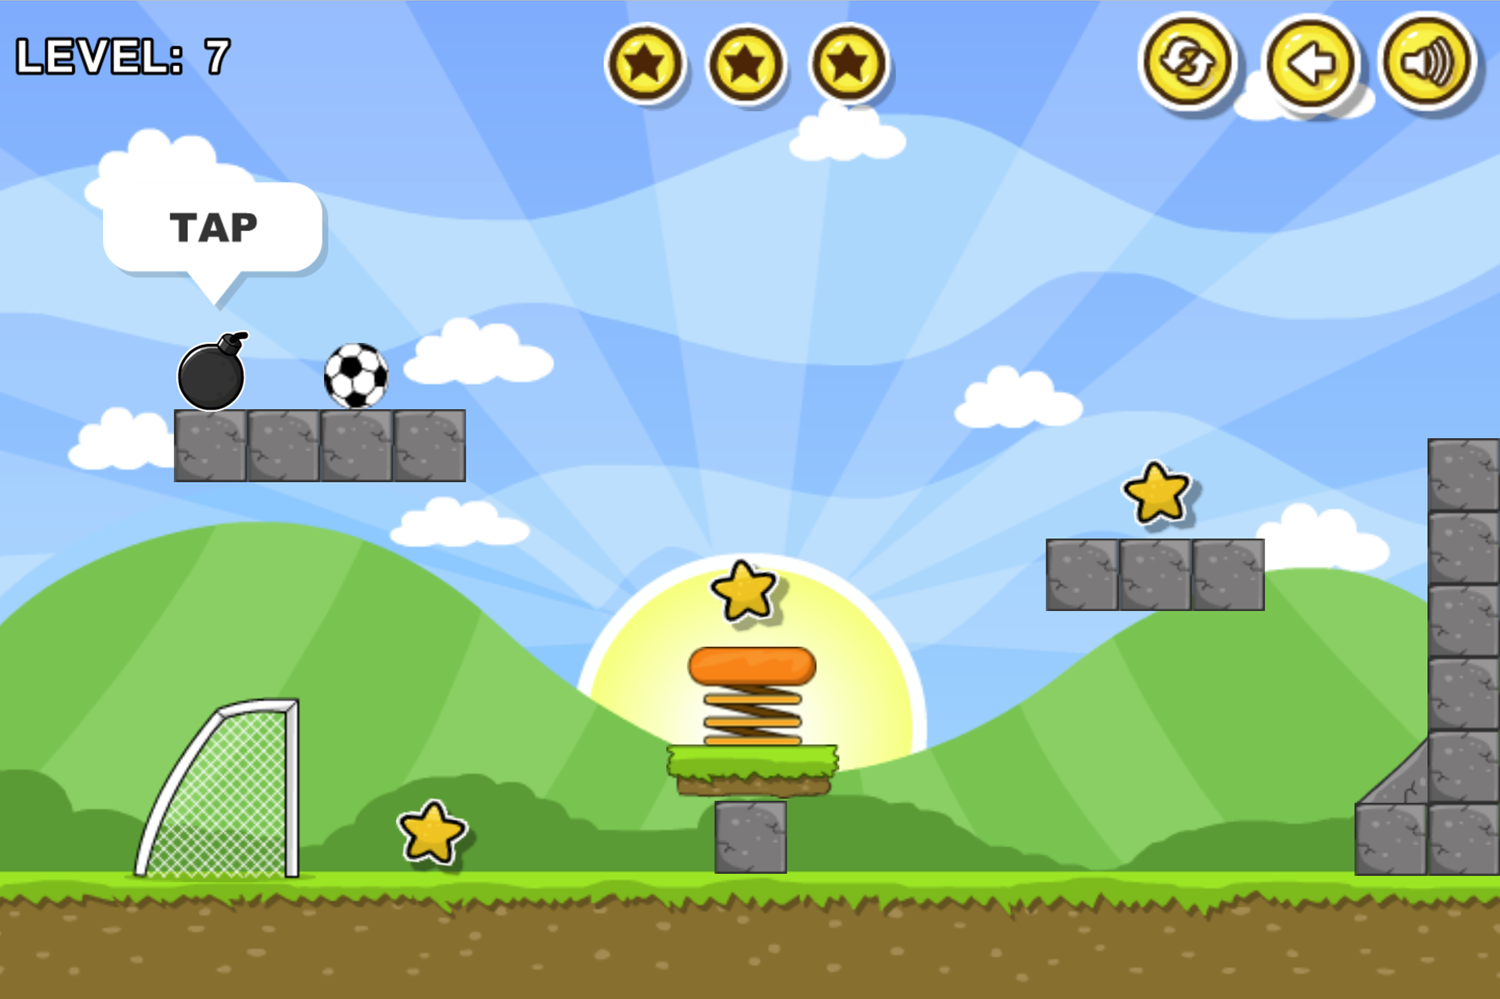 Gravity Soccer Game Bomb Activation Instructions Screenshot.